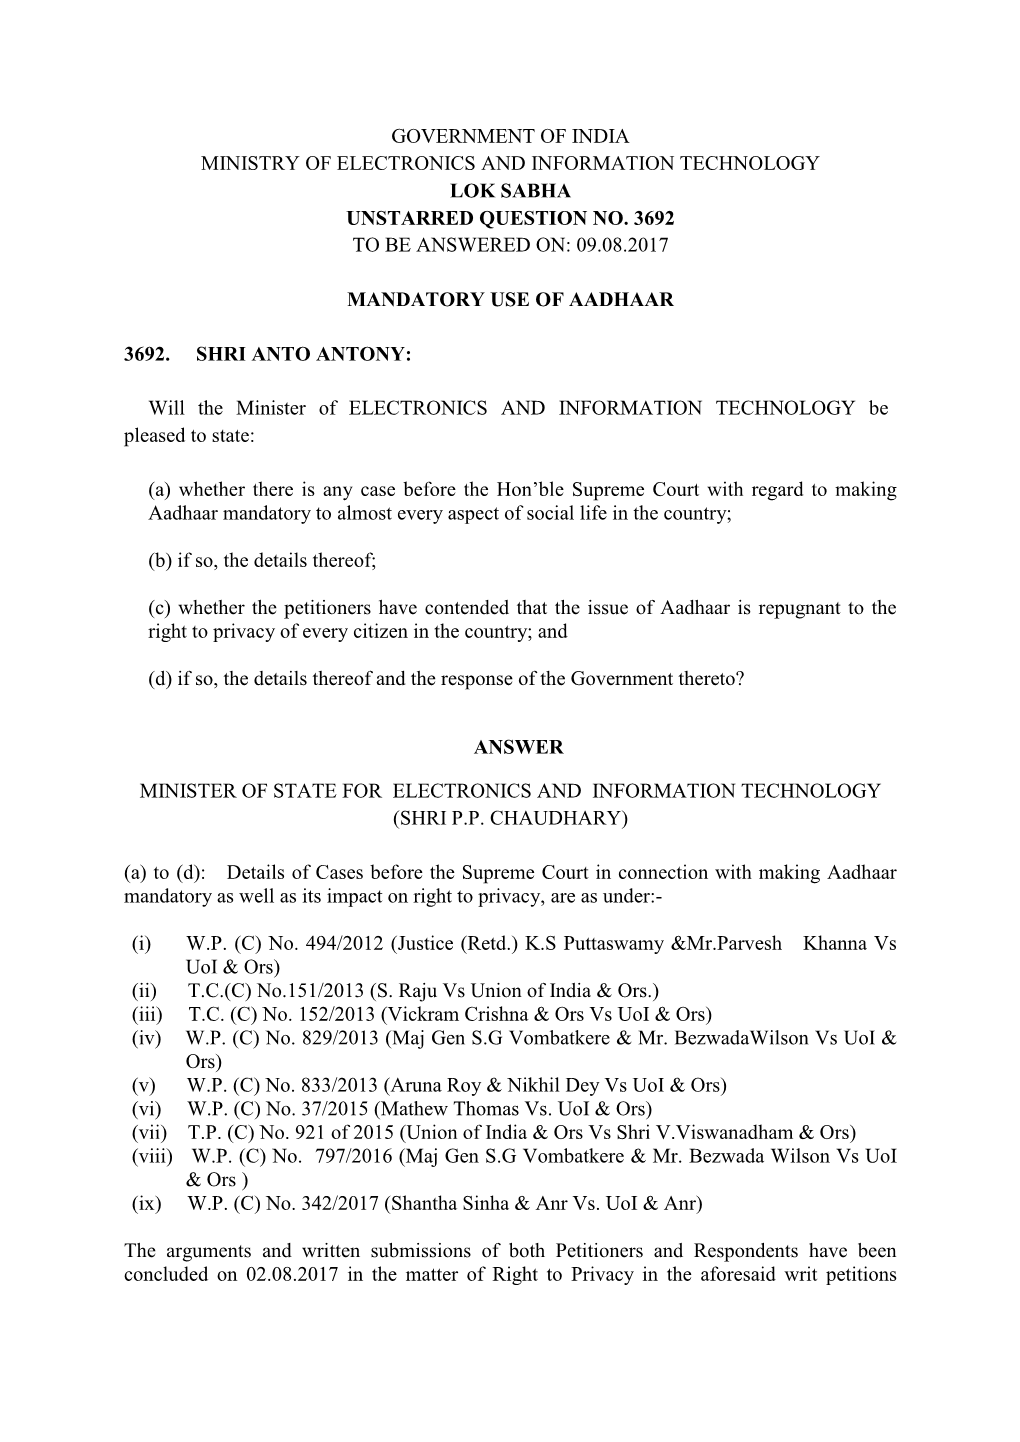 Government of India Ministry of Electronics and Information Technology Lok Sabha Unstarred Question No